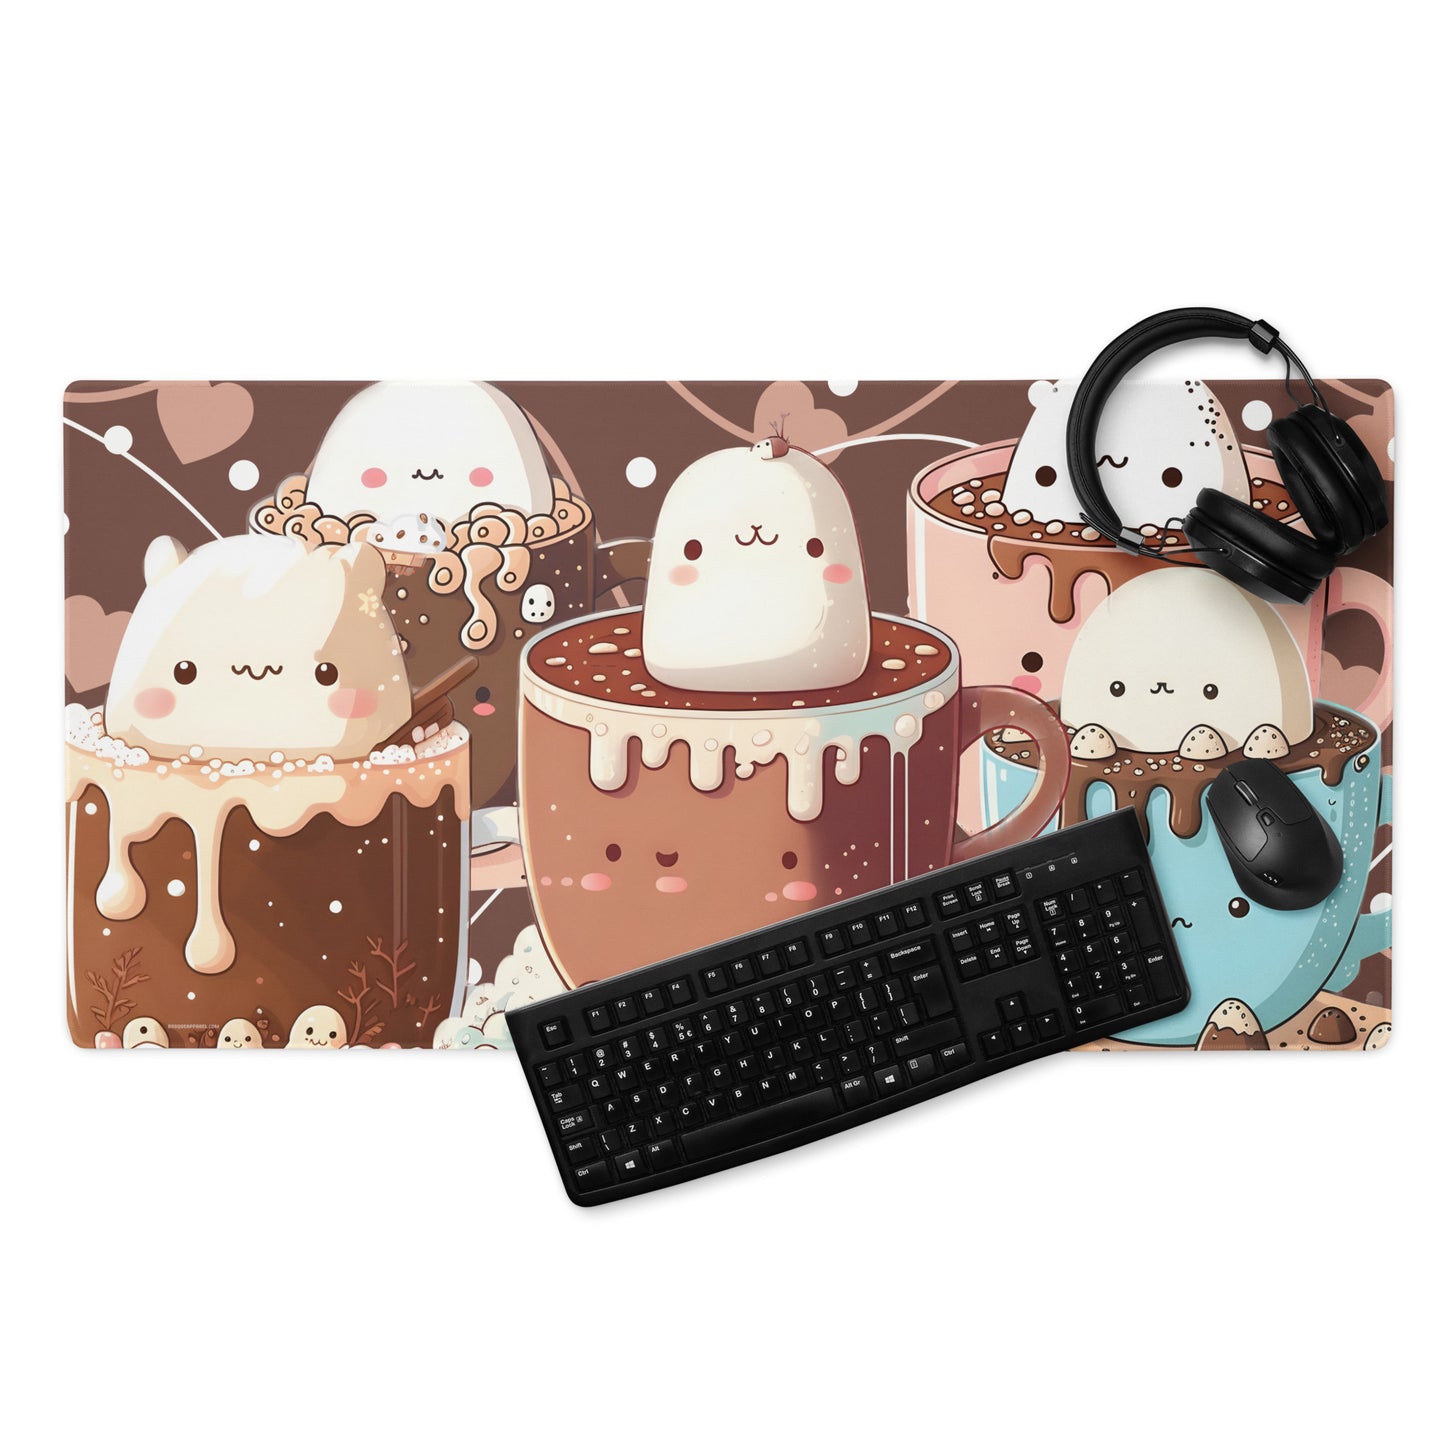 Hot Chocolate Cocoa Cats Kawaii Aesthetic Gaming mouse pad